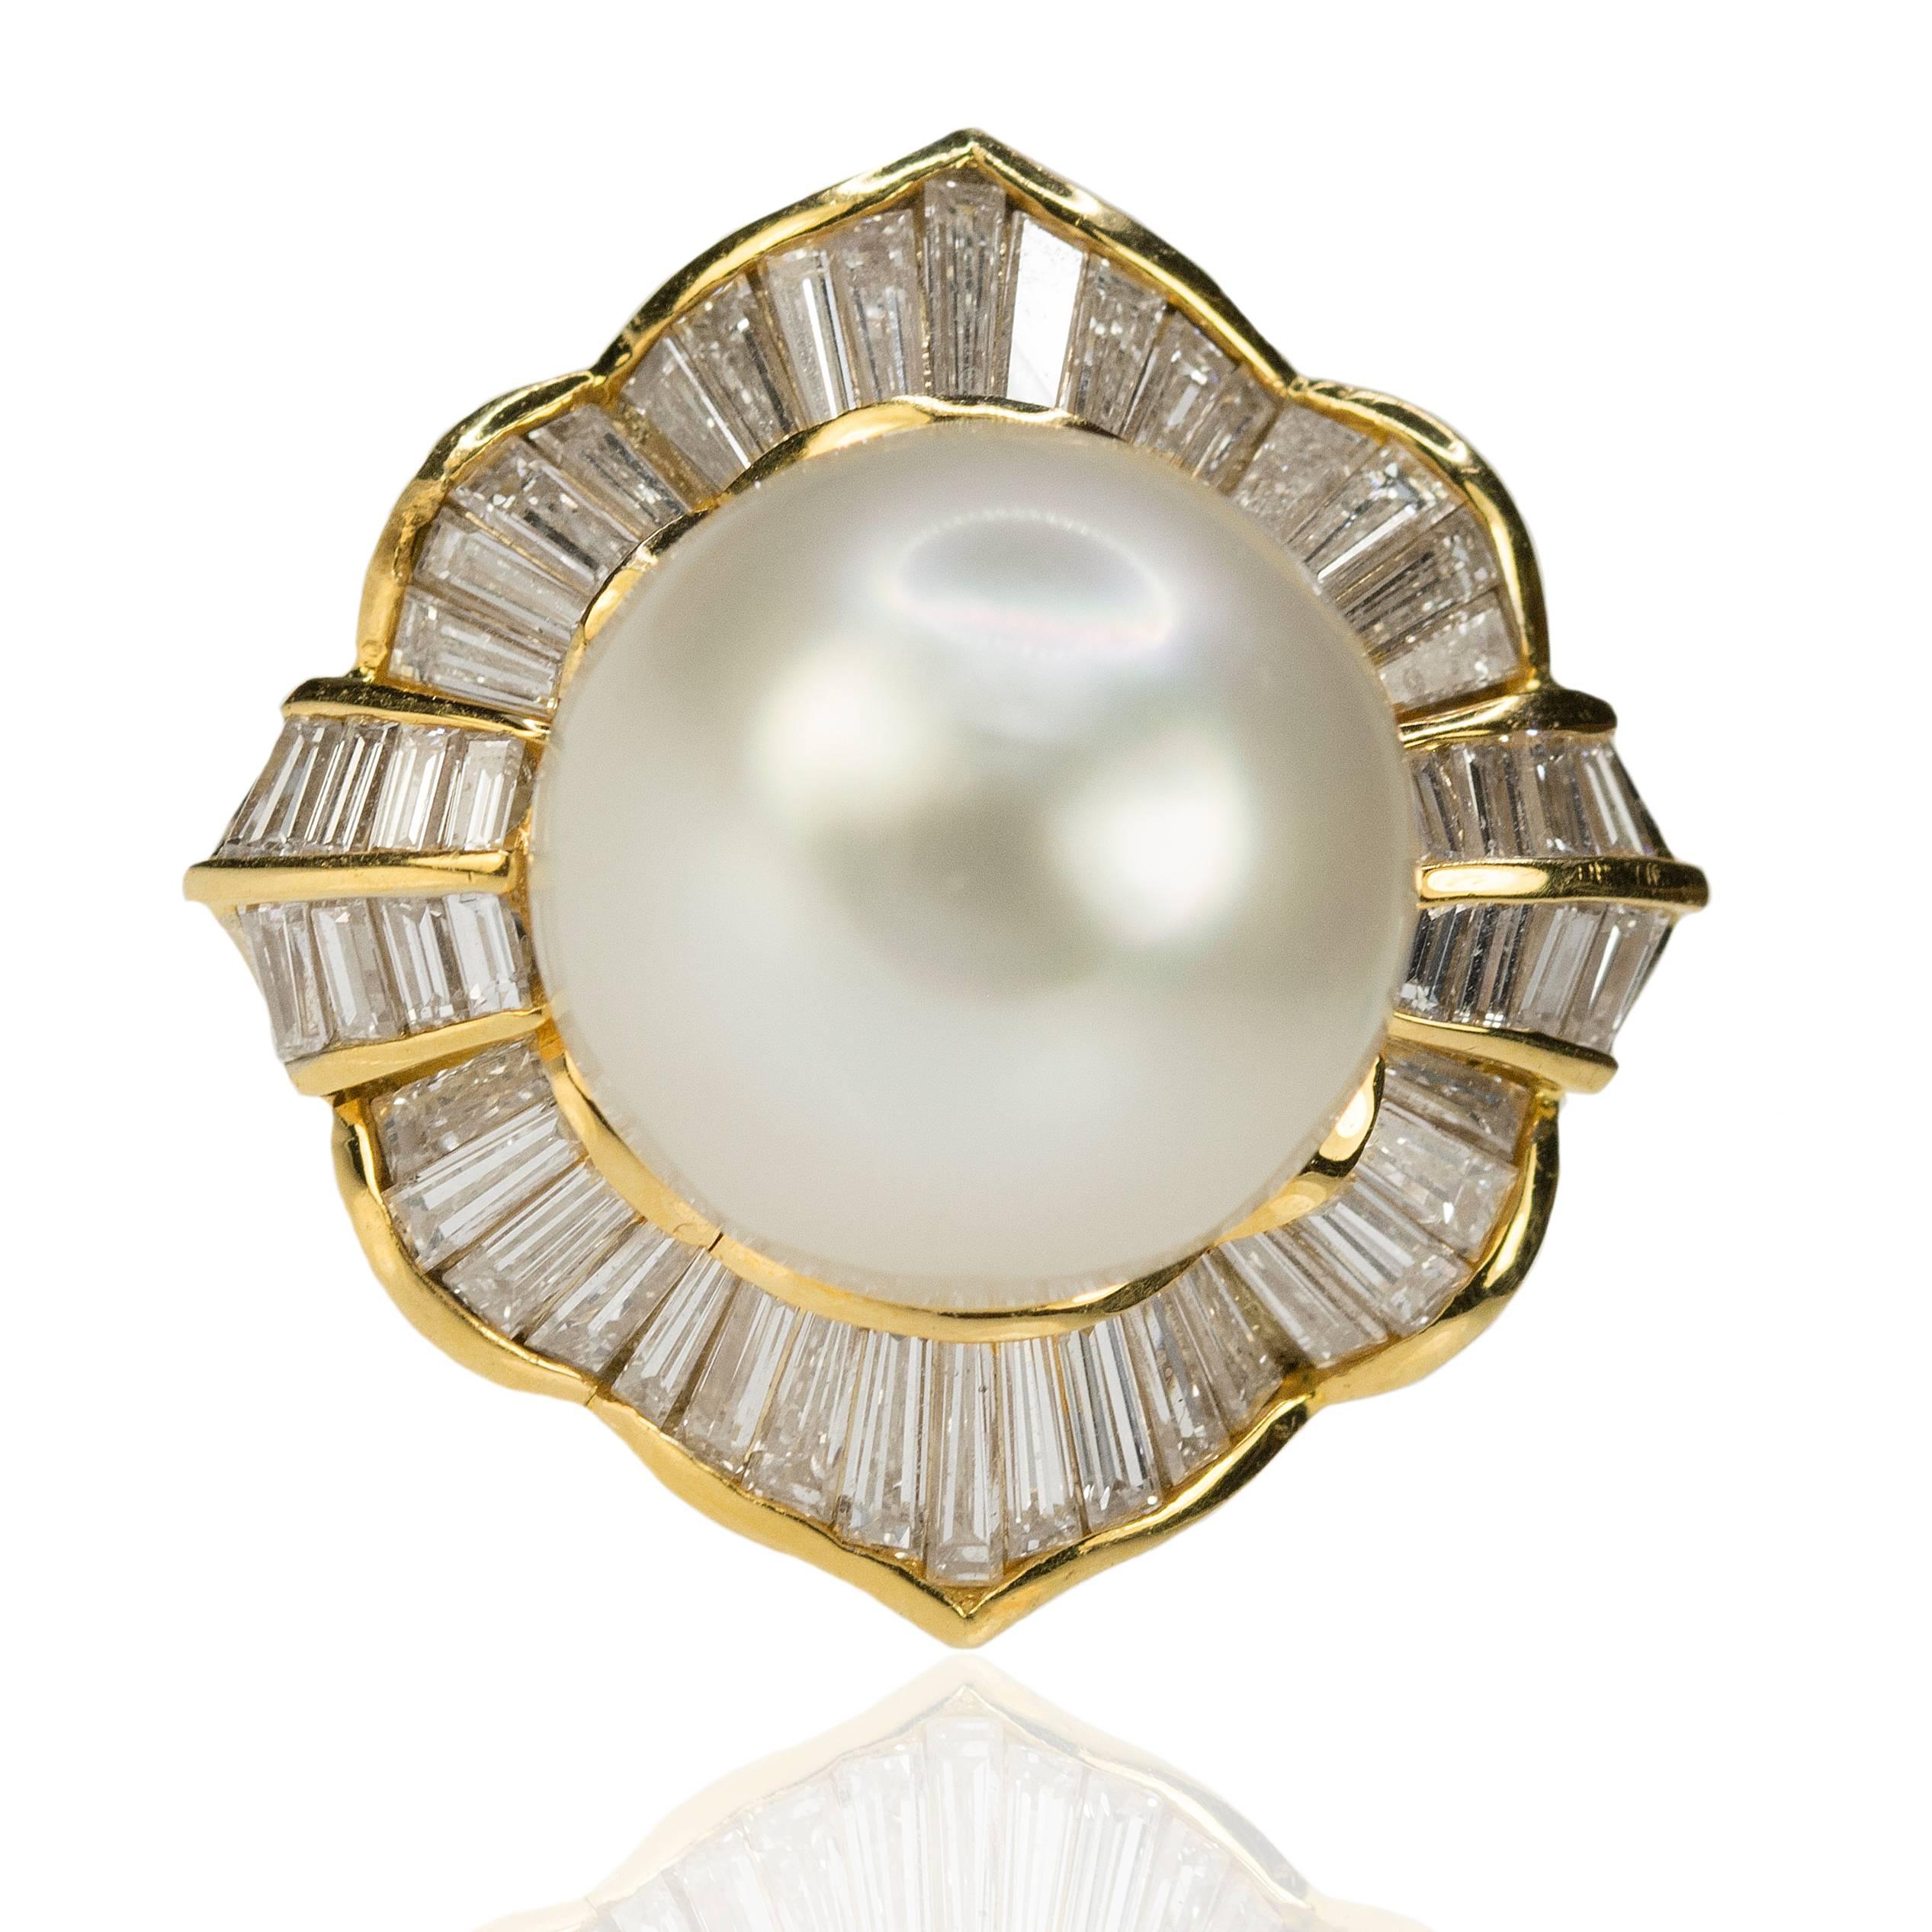 Stunning 13.5mm South Sea Pearl set in 18k yellow gold ring with 46 bagueete diamonds weighing approximately 2.00 carats.